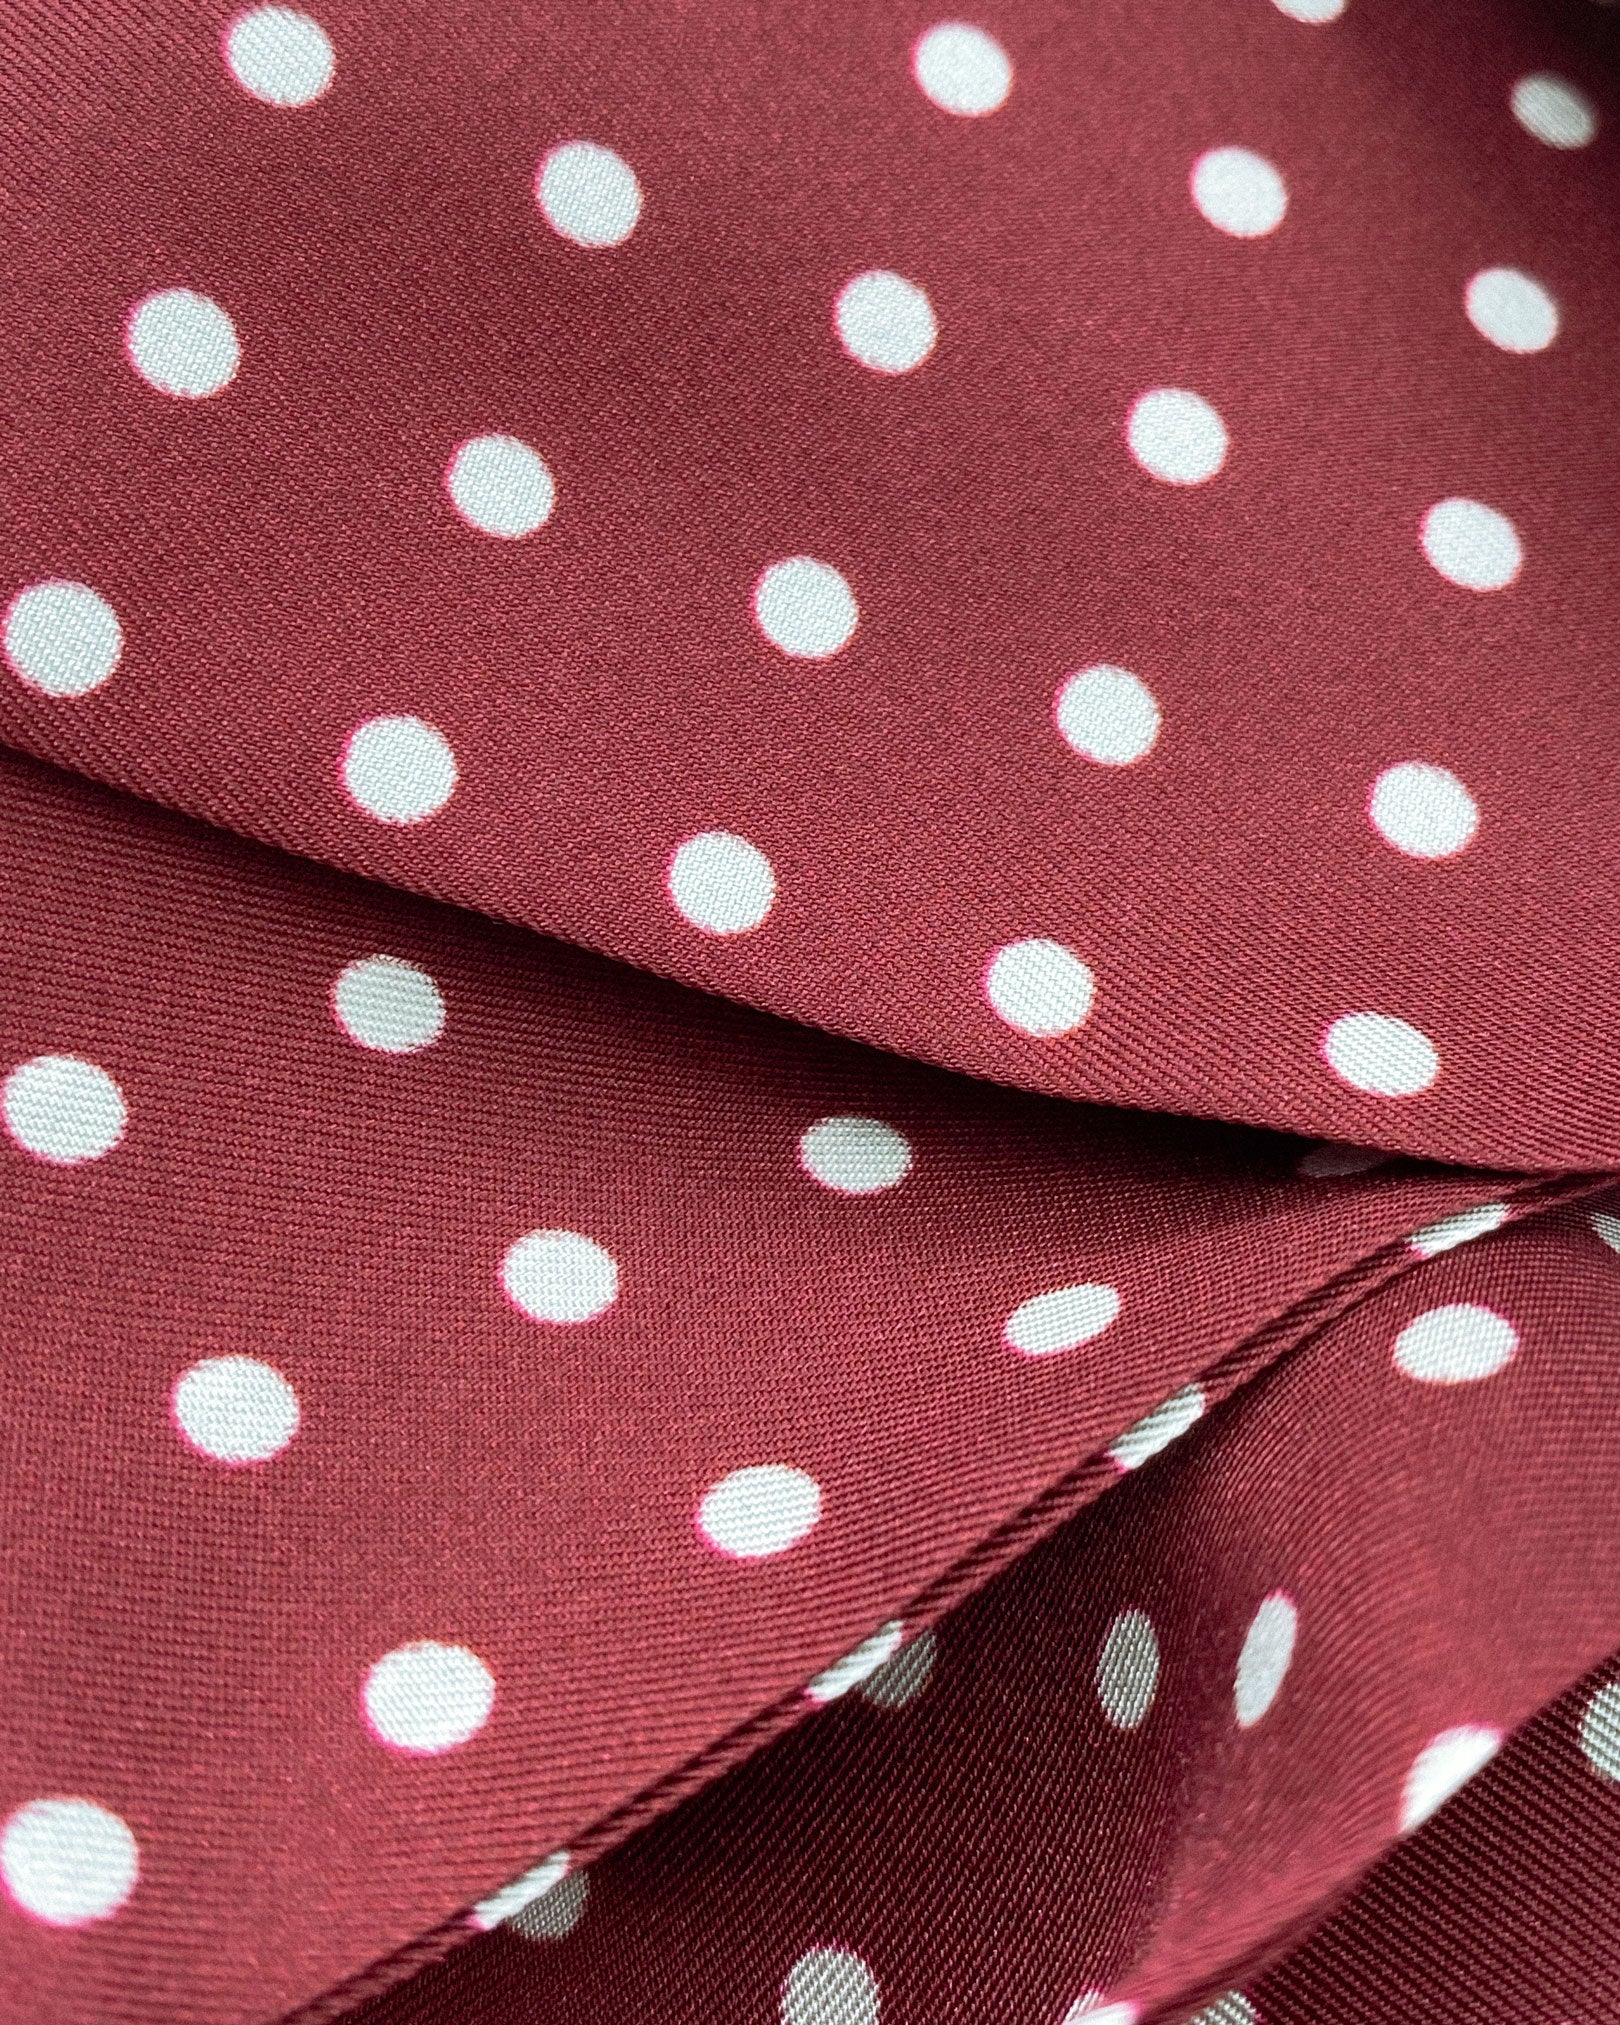 Ruffled close-up view of the Sapporo silk aviator scarf, presenting a closer view of the polka dot design in deep maroon with white dots and appealing lustre of the material.